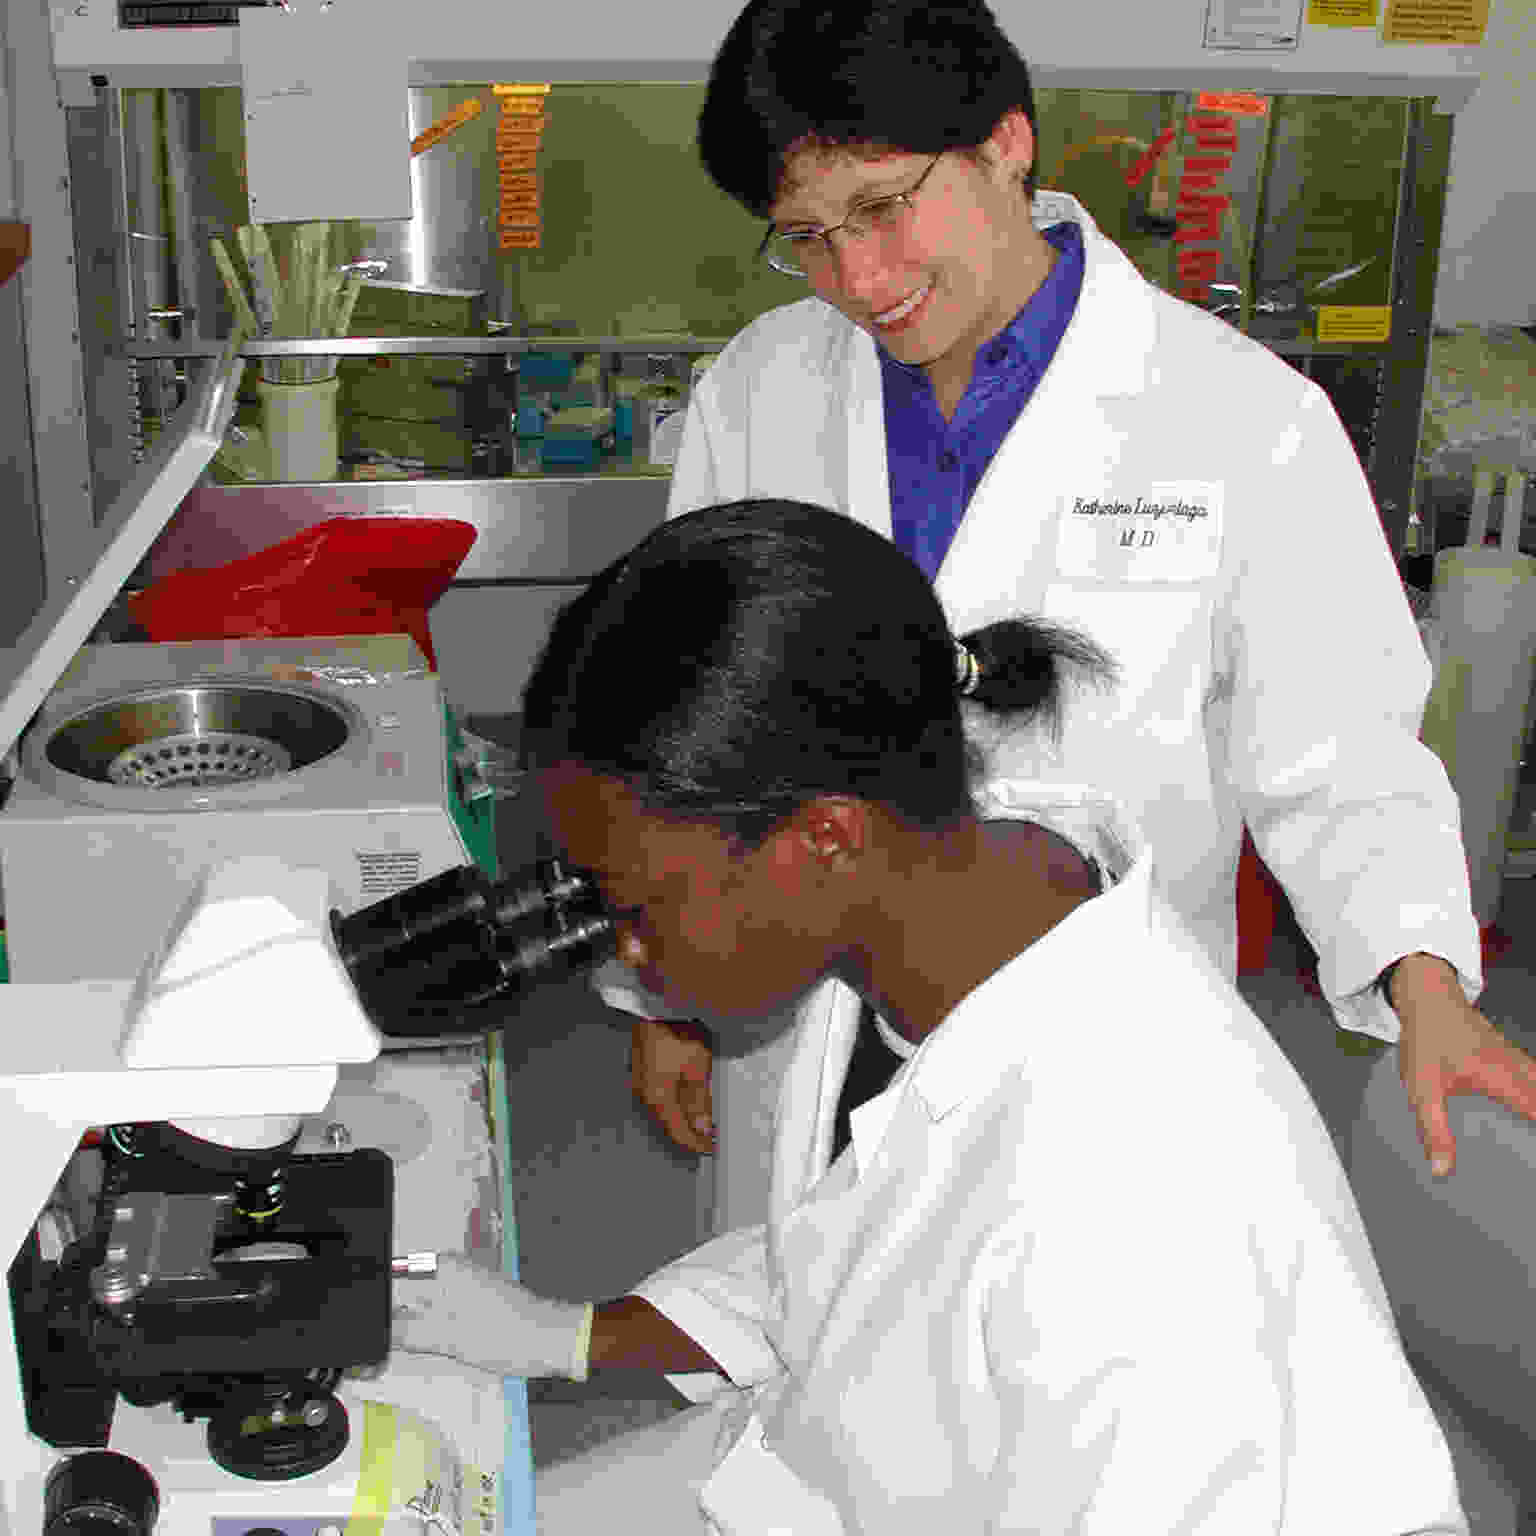 Why It Matters - 2 researchers at UMass, one standing while the other looks through microscope